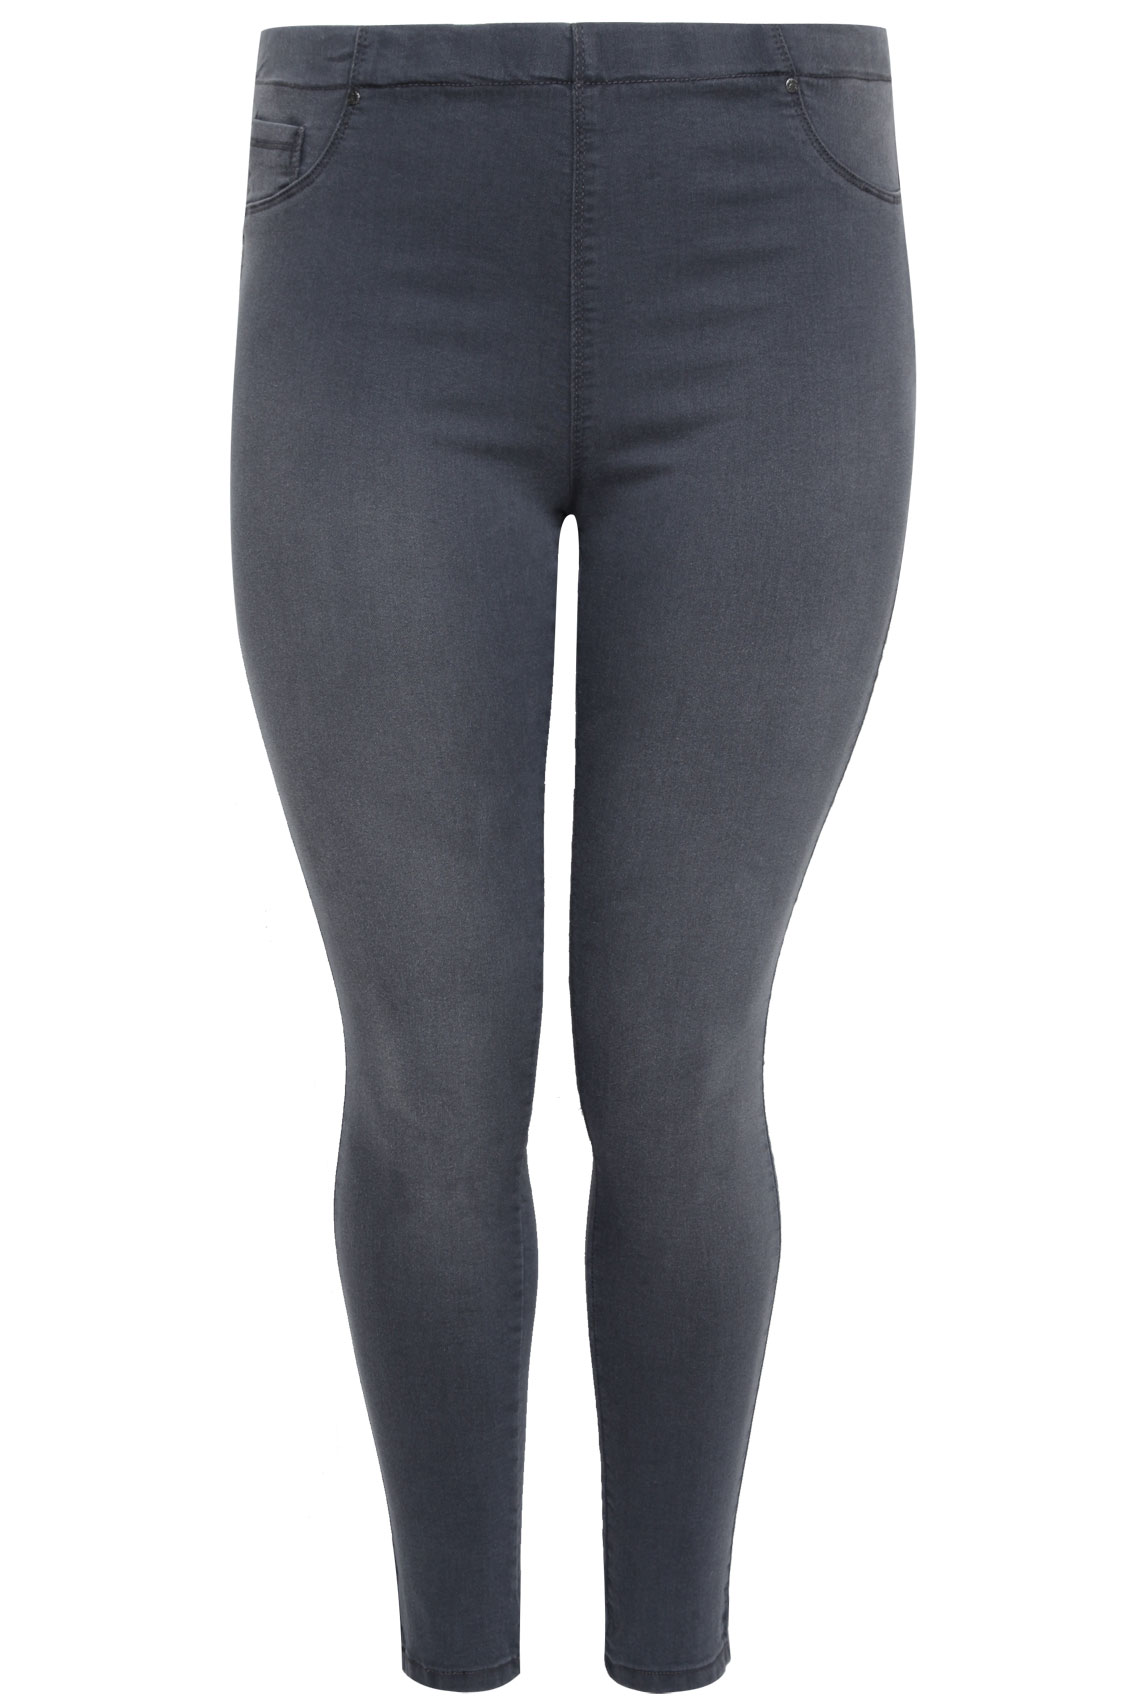 Grey Denim Jeggings With Faded Leg Detail plus Size 14 to 28